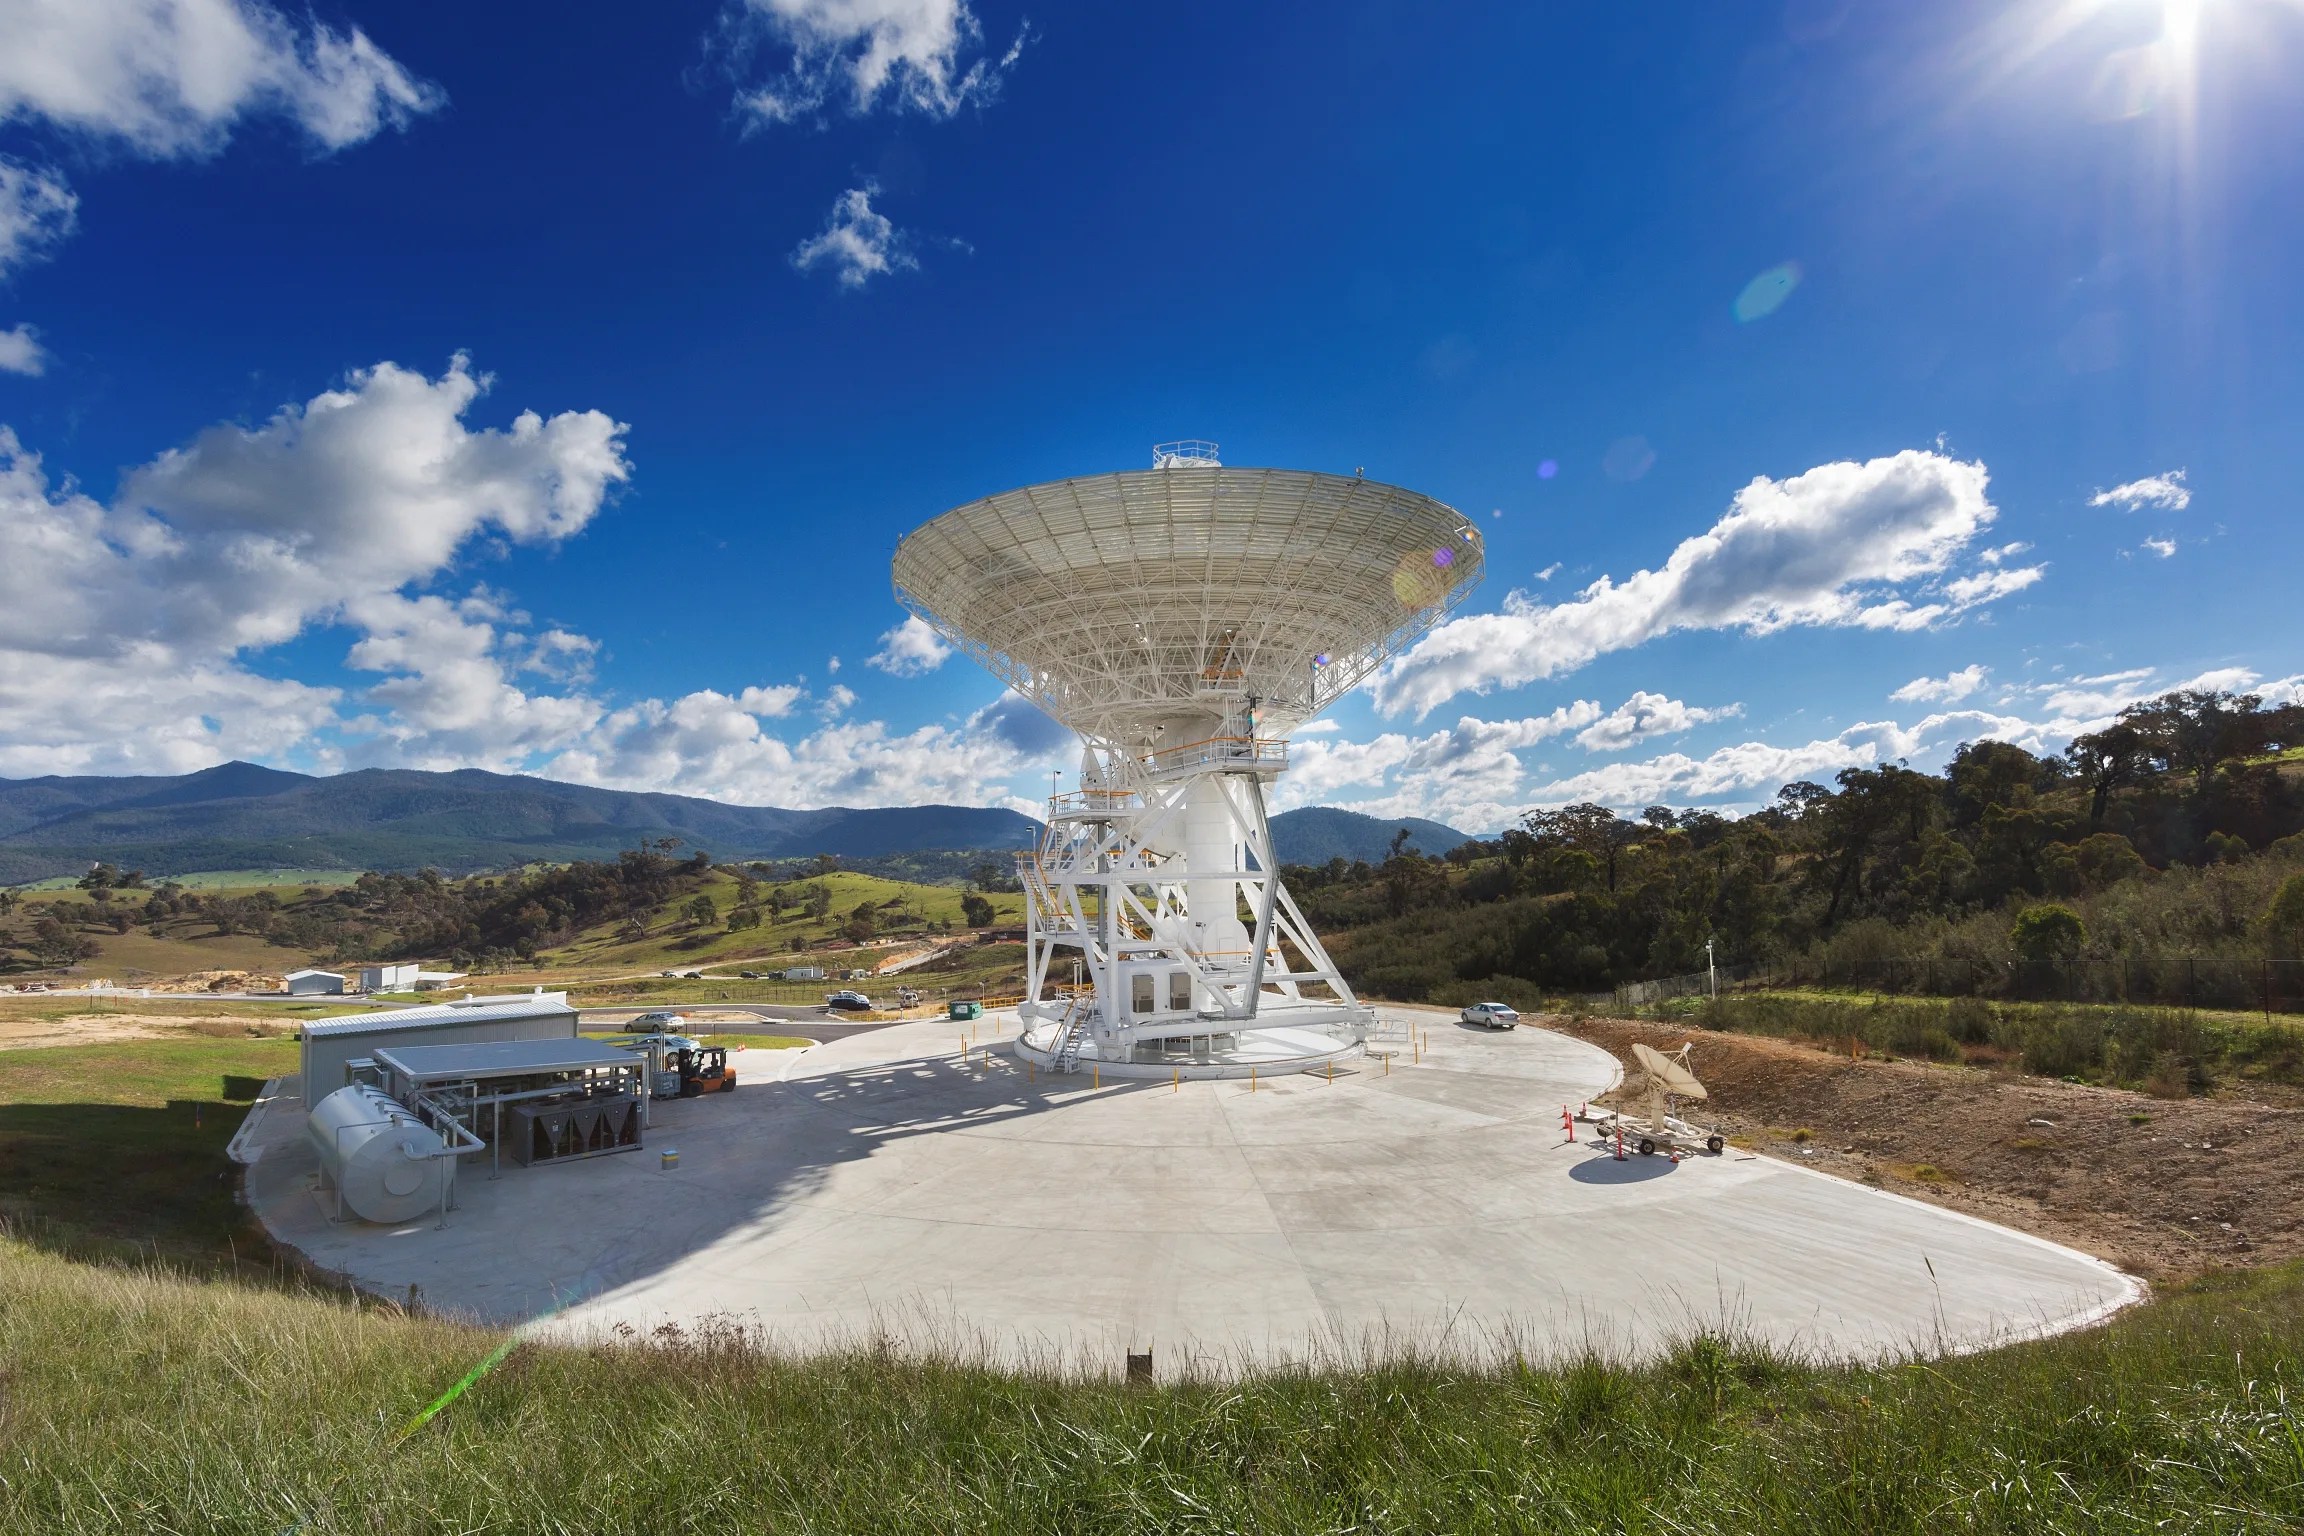 A 70-meter antenna at the Canberra Deep Space Communications Complex in Canberra, Australia